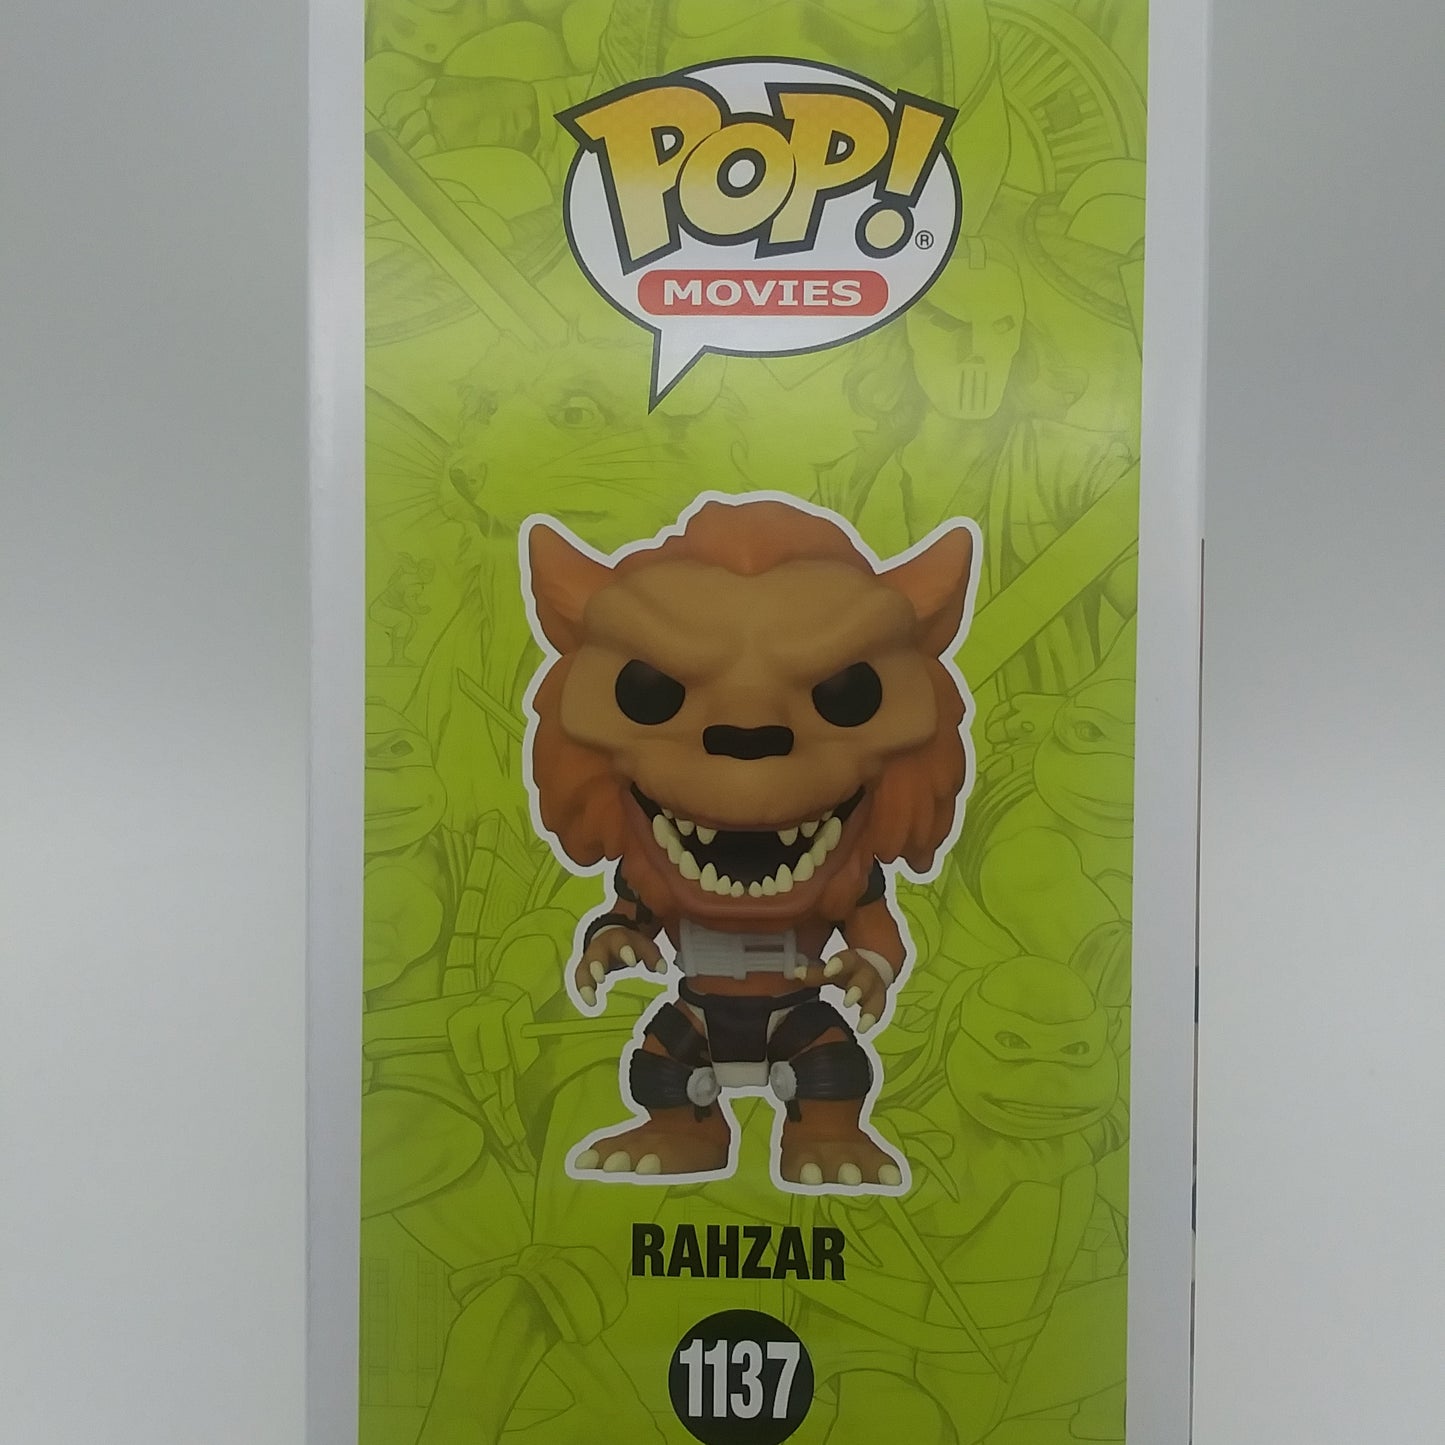 The side of the box featuring a picture of the action figure with the logo of funko pop above it. The name 'RAZHAR' is under the picture. 